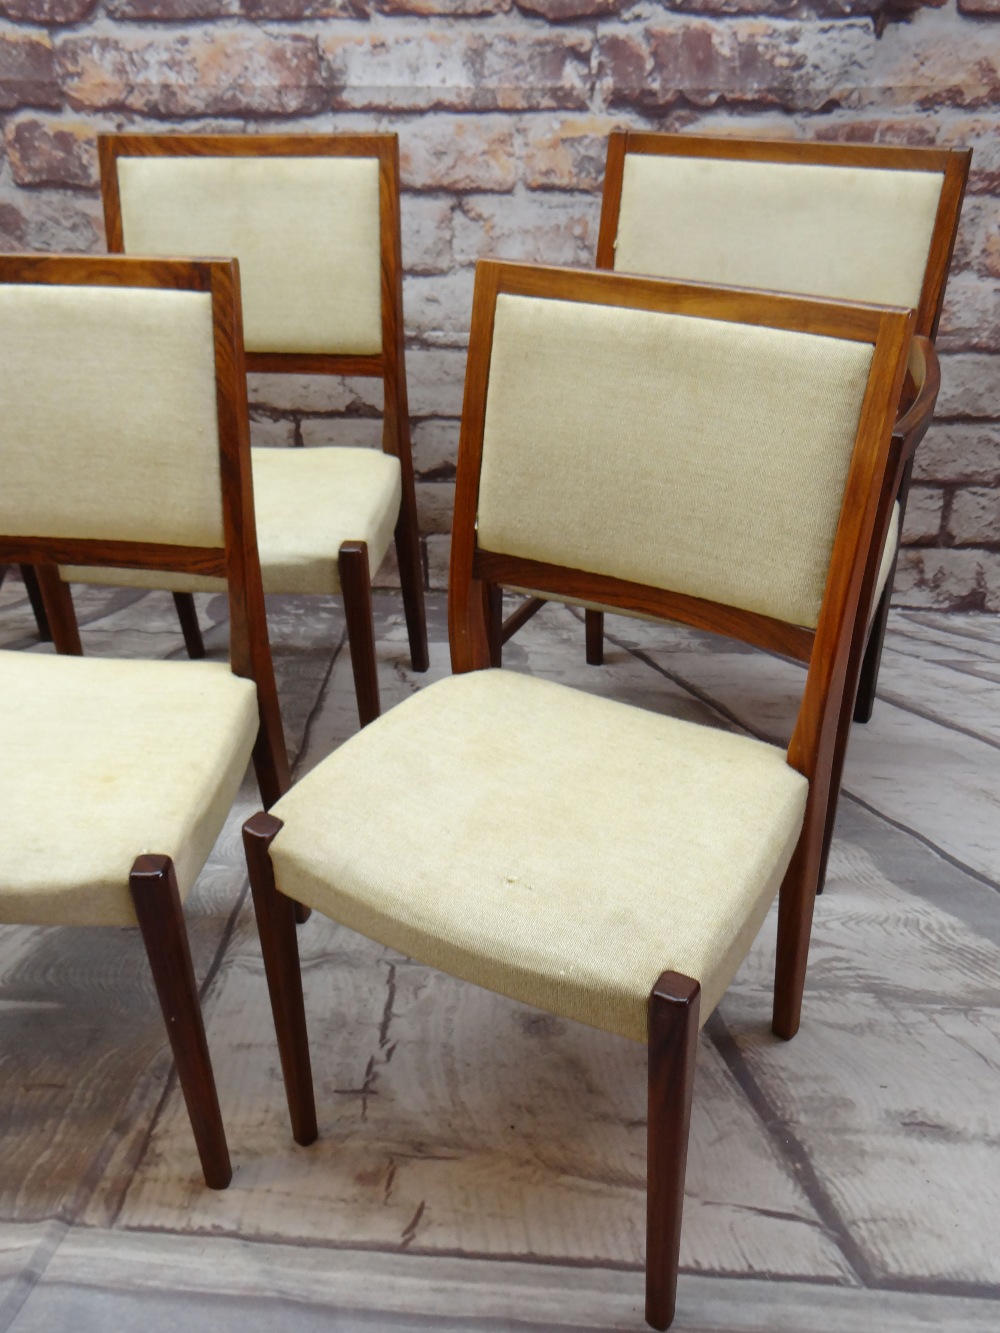 SET OF SIX SWEDISH 'SVEGARDS' DINING CHAIRS with pale gold woven stuff-over seats and backs, - Image 2 of 4